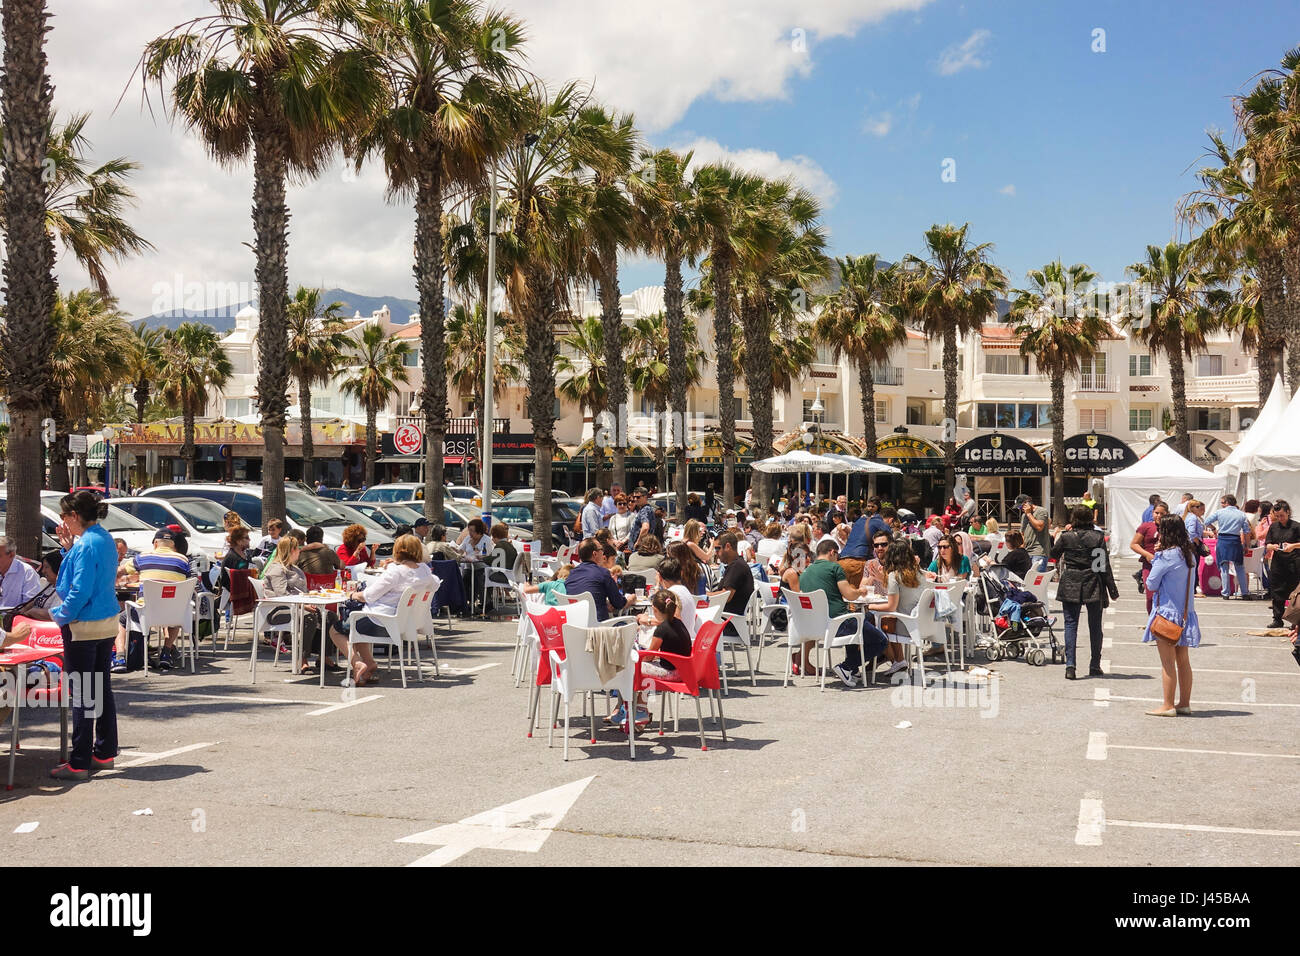 Seafood festival, event, festive in port of Benalmadena, Andalusia, Spain. Stock Photo